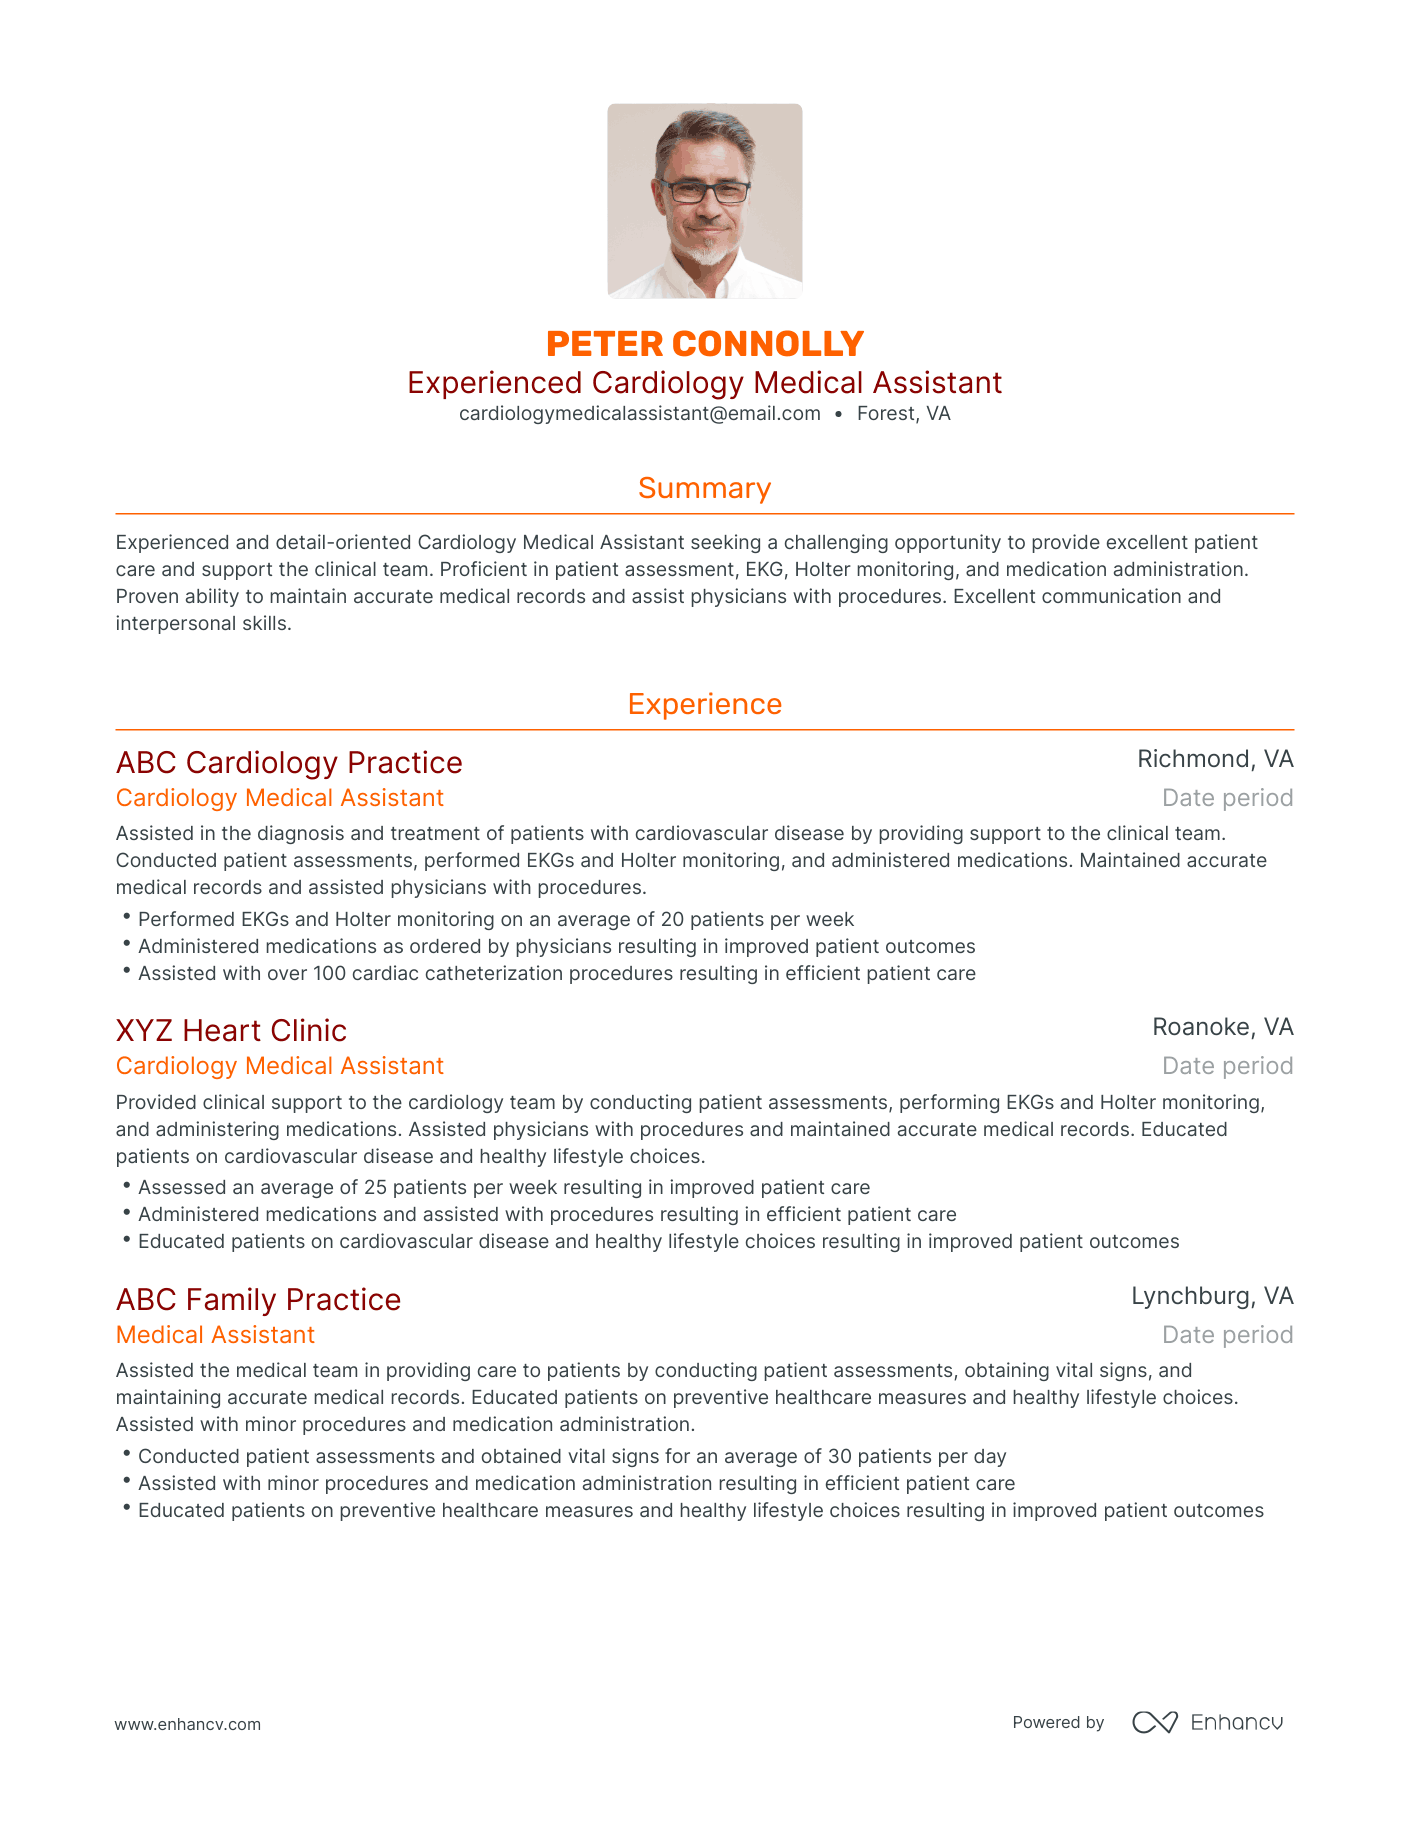 Traditional Cardiology Medical Assistant Resume Template